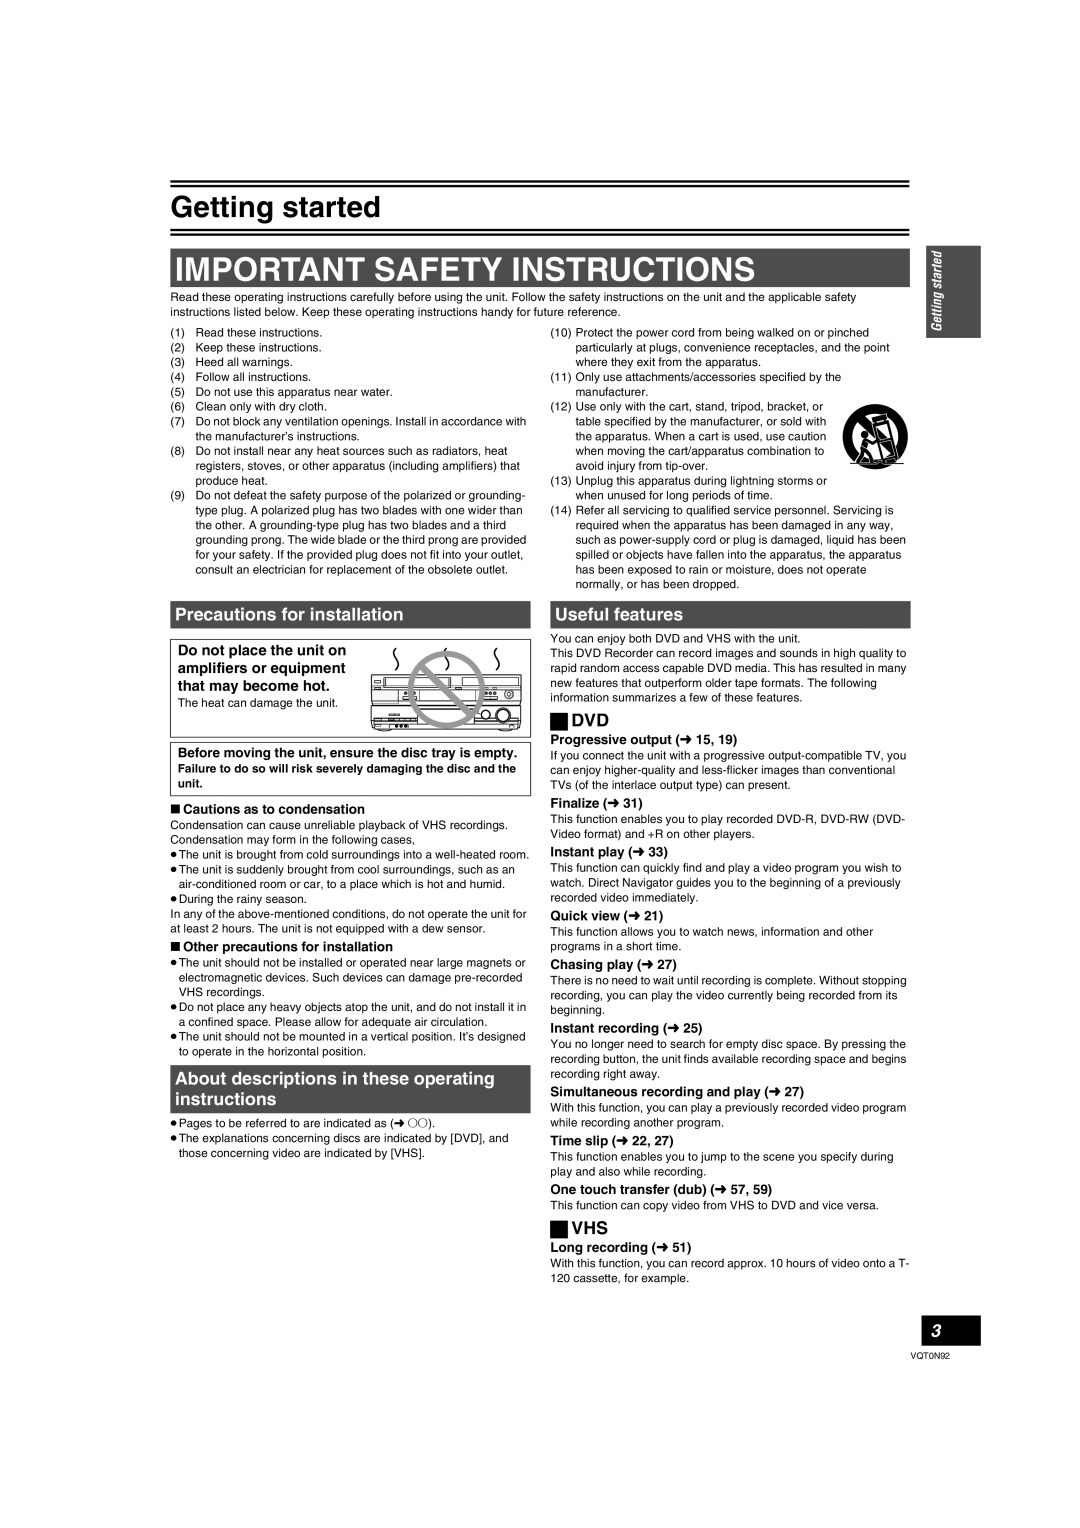 Panasonic DMR-ES30V Precautions for installation, About descriptions in these operating instructions, Useful features 